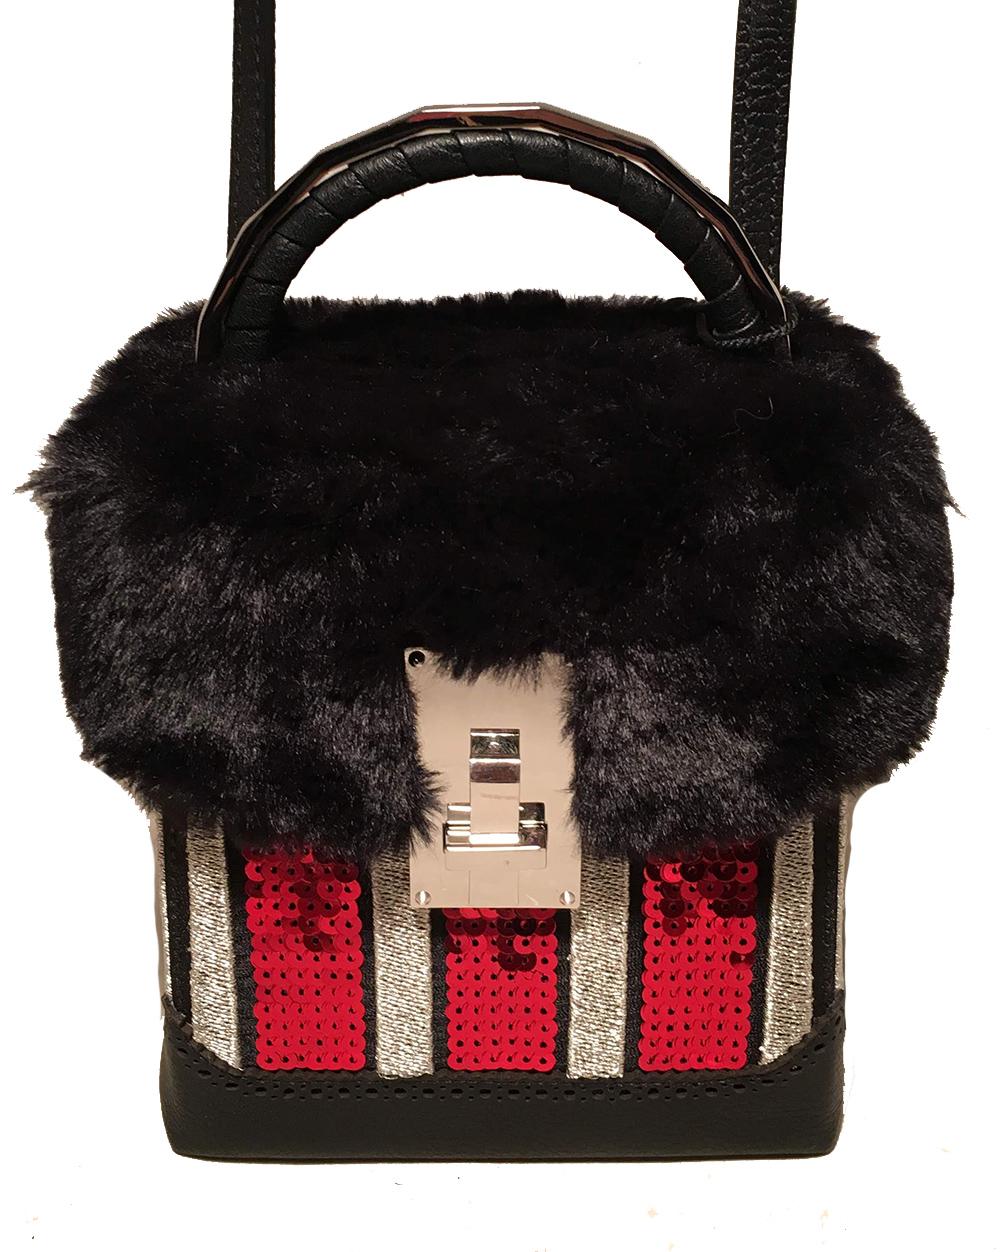 NWT The Volon Red Sequin & Black Fur Great Box Bag in NWT condition. Red sequin paillette and silver embroidered stripes along body with a soft black fur top. Silver hardware with black leather trim and attached shoulder strap. Front latch closure